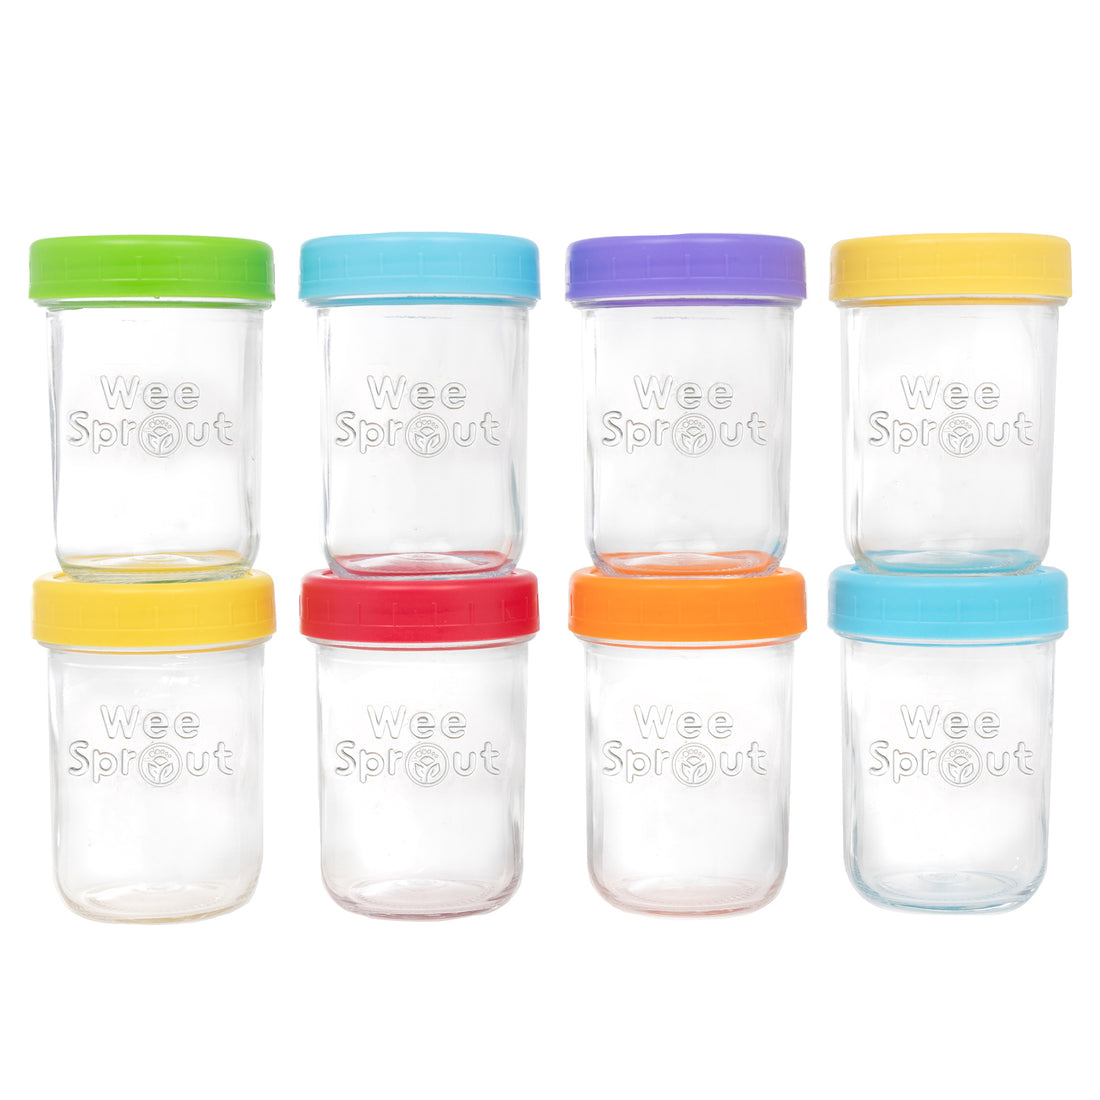 Glass Storage Containers in Food Storage Containers 